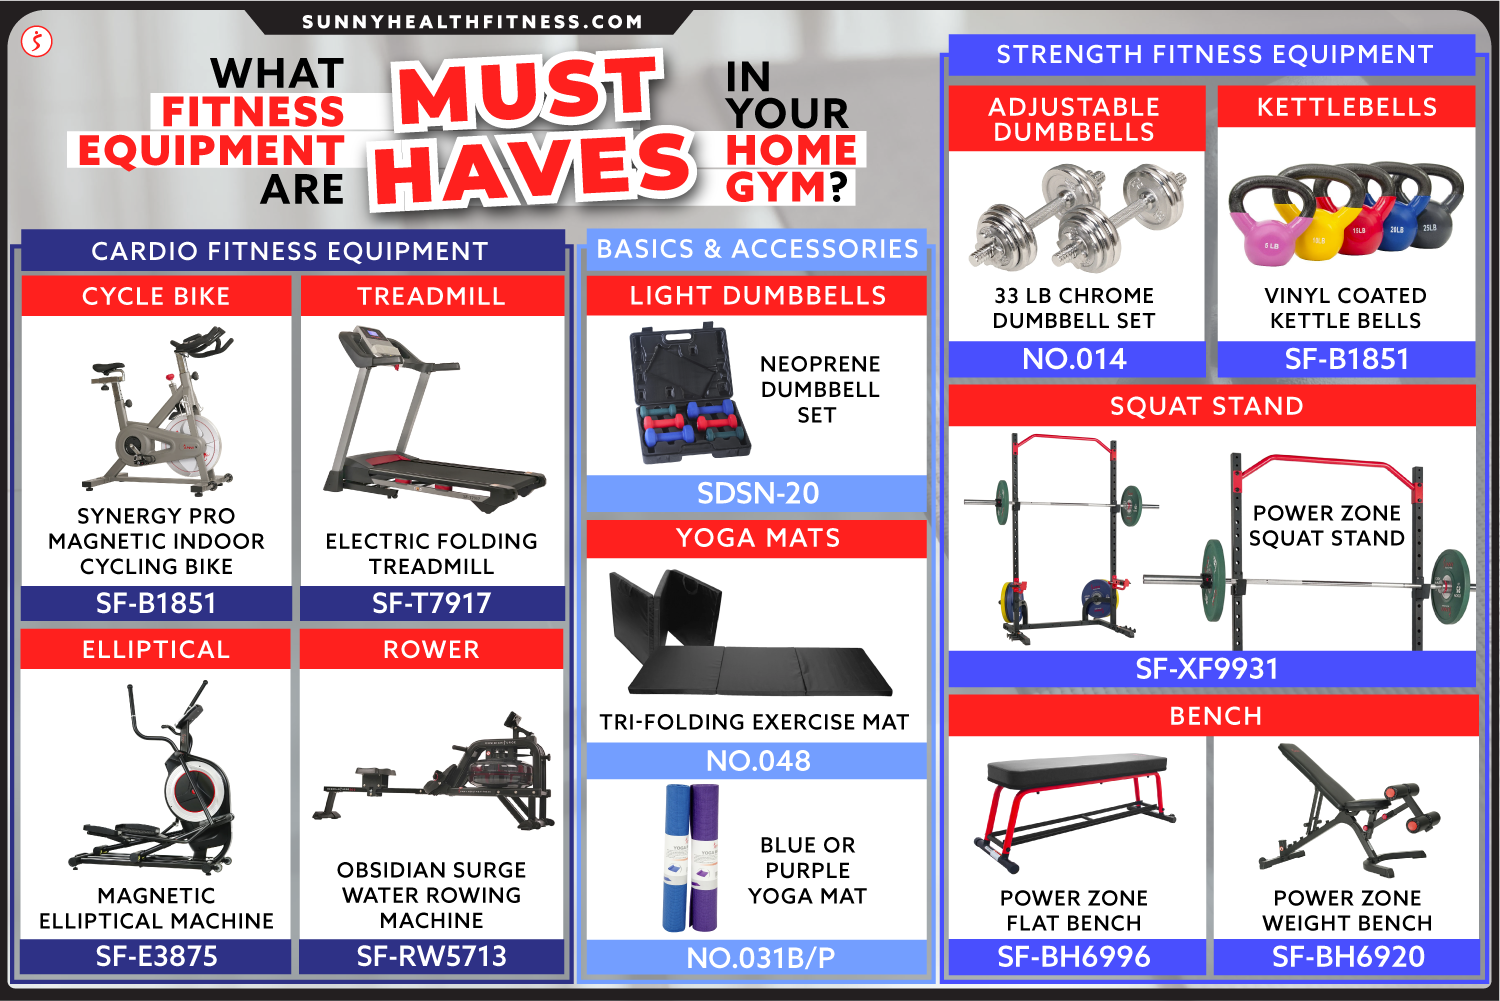 https://cdn.shopify.com/s/files/1/0052/7043/7978/t/90/assets/_Home-Gym-Must-Haves-Equipment_2.png